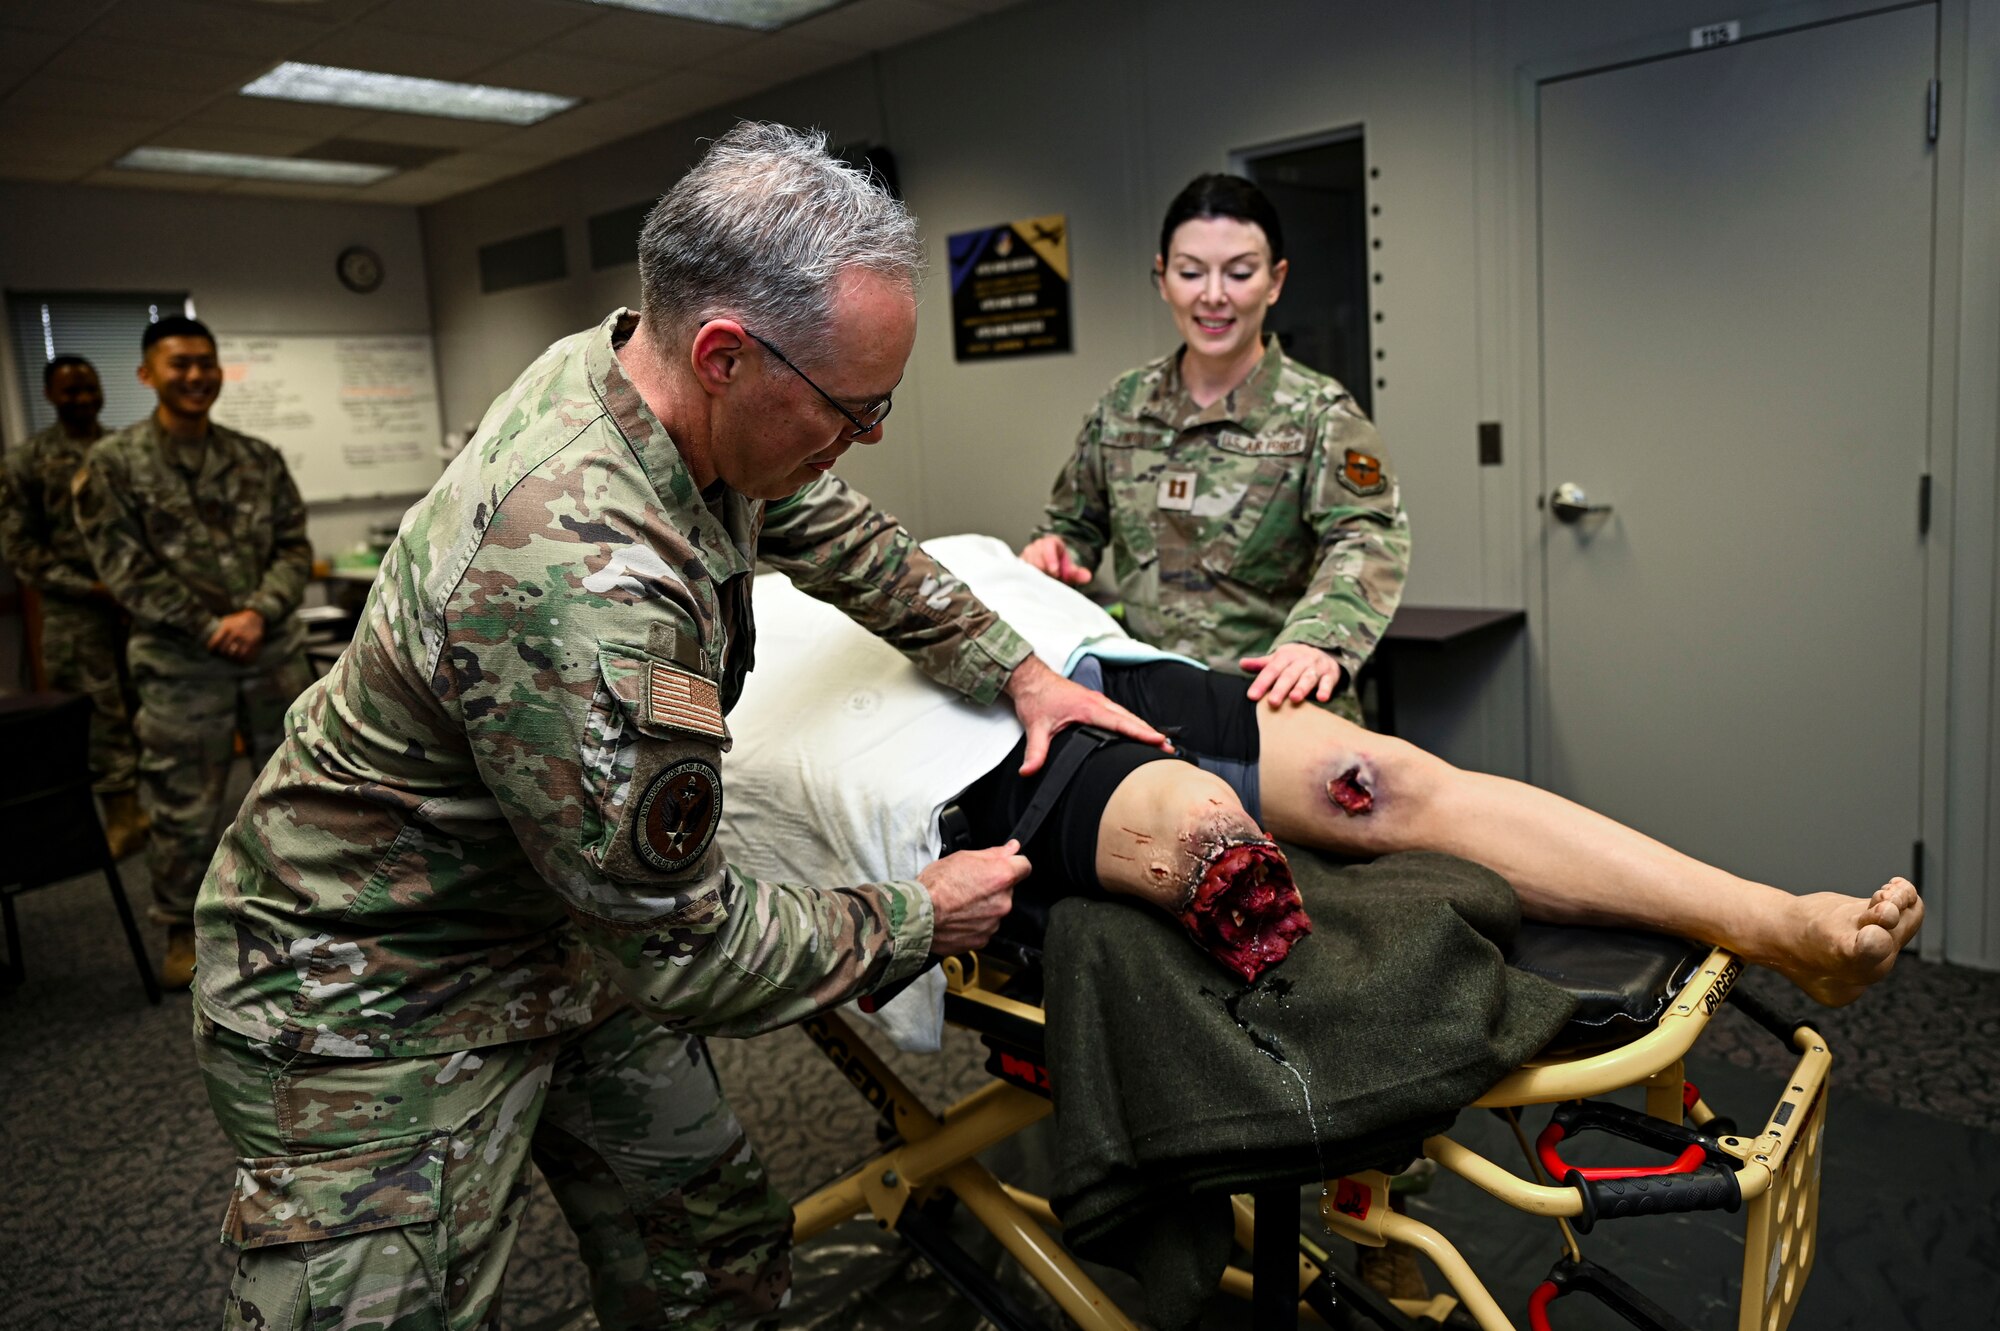 U.S. Air Force Col. Christopher Grussendorf, Air Education and Training Command surgeon general, performs Tactical Combat Casualty Care on a test dummy at Holloman Air Force Base, New Mexico, April 13, 2023. TCCC is utilized to teach both service members and civilians life-saving techniques that can help save lives on the battlefield and in other life-threatening scenarios. (U.S. Air Force photo by Airman 1st Class Isaiah Pedrazzini)